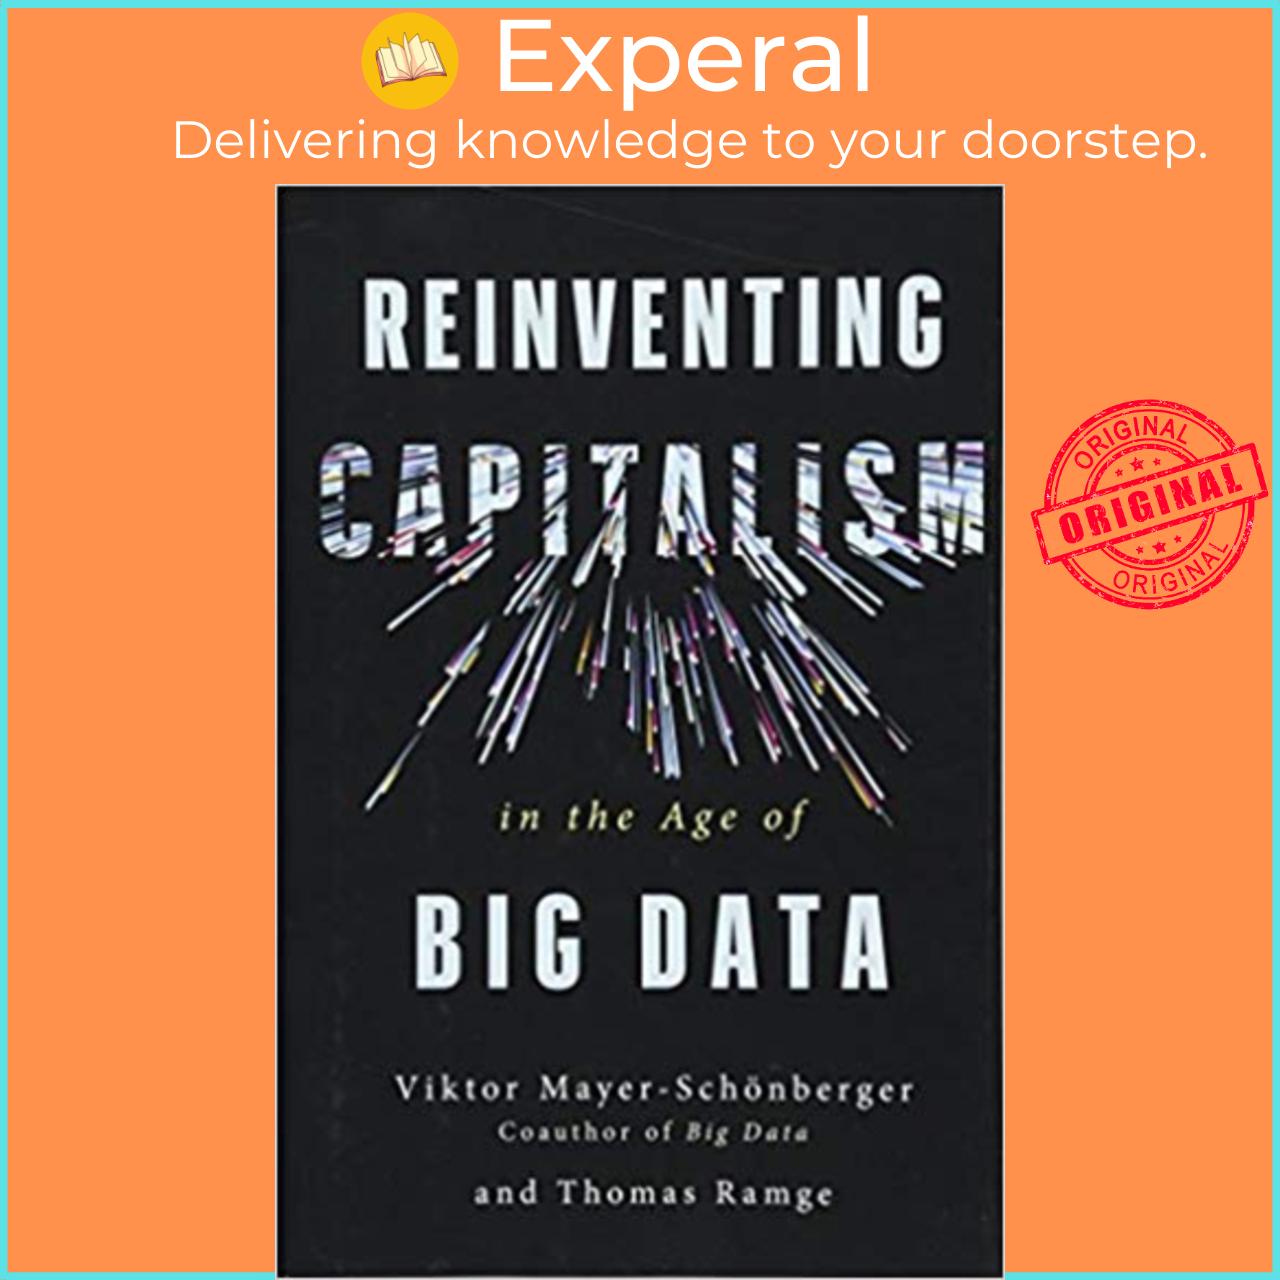 Sách - Reinventing Capitalism in the Age of Big Data by Viktor Mayer-Sch?nberger (US edition, paperback)